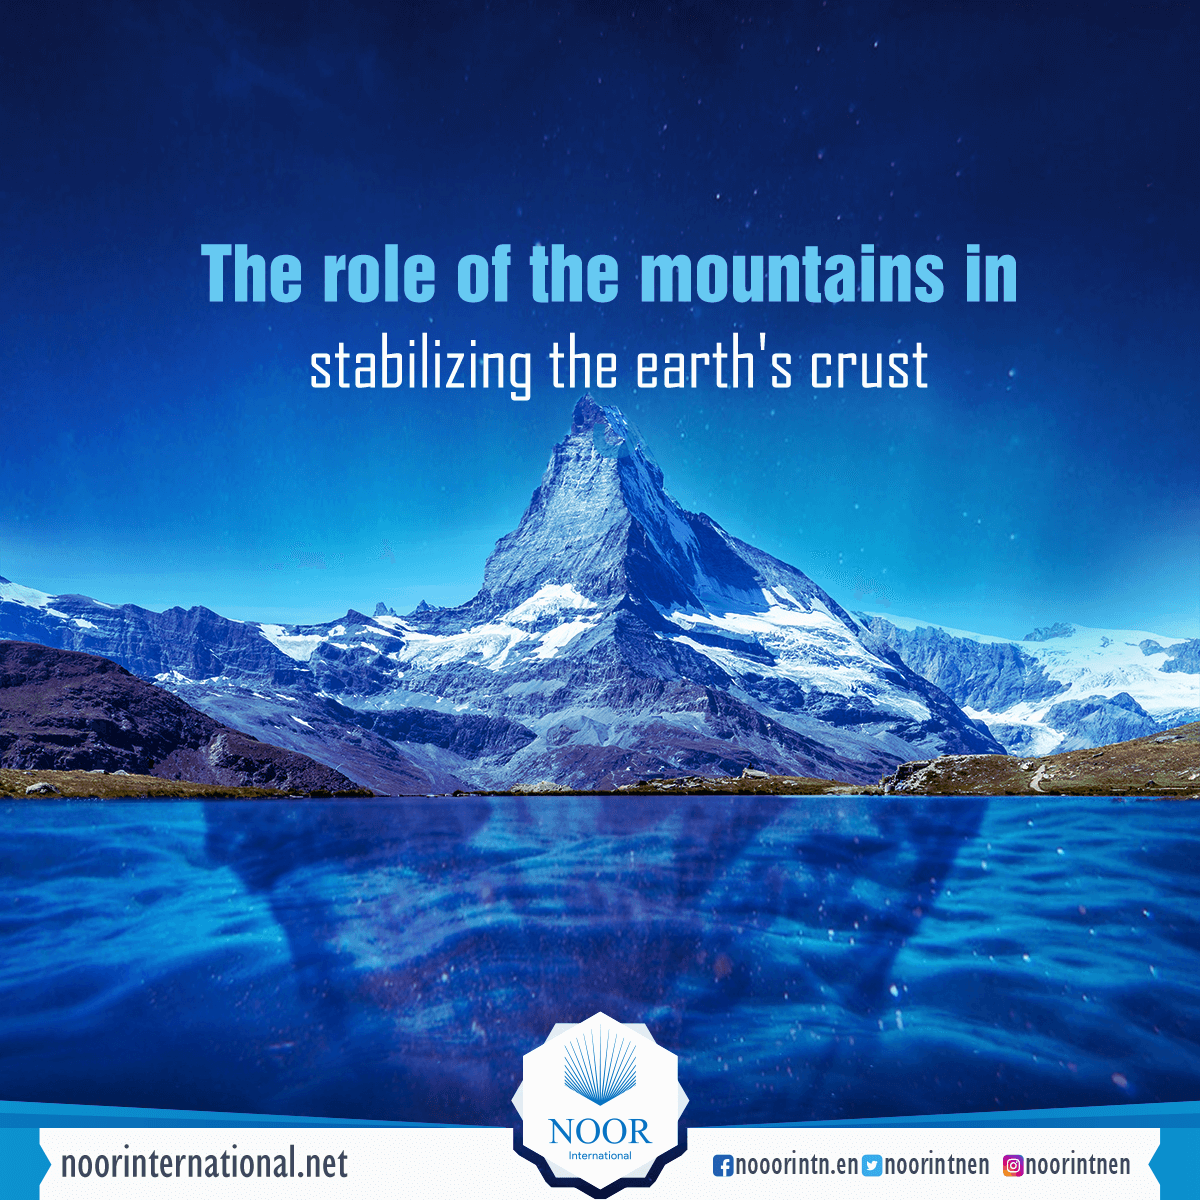 The role of the mountains in stabilizing the earth's crust